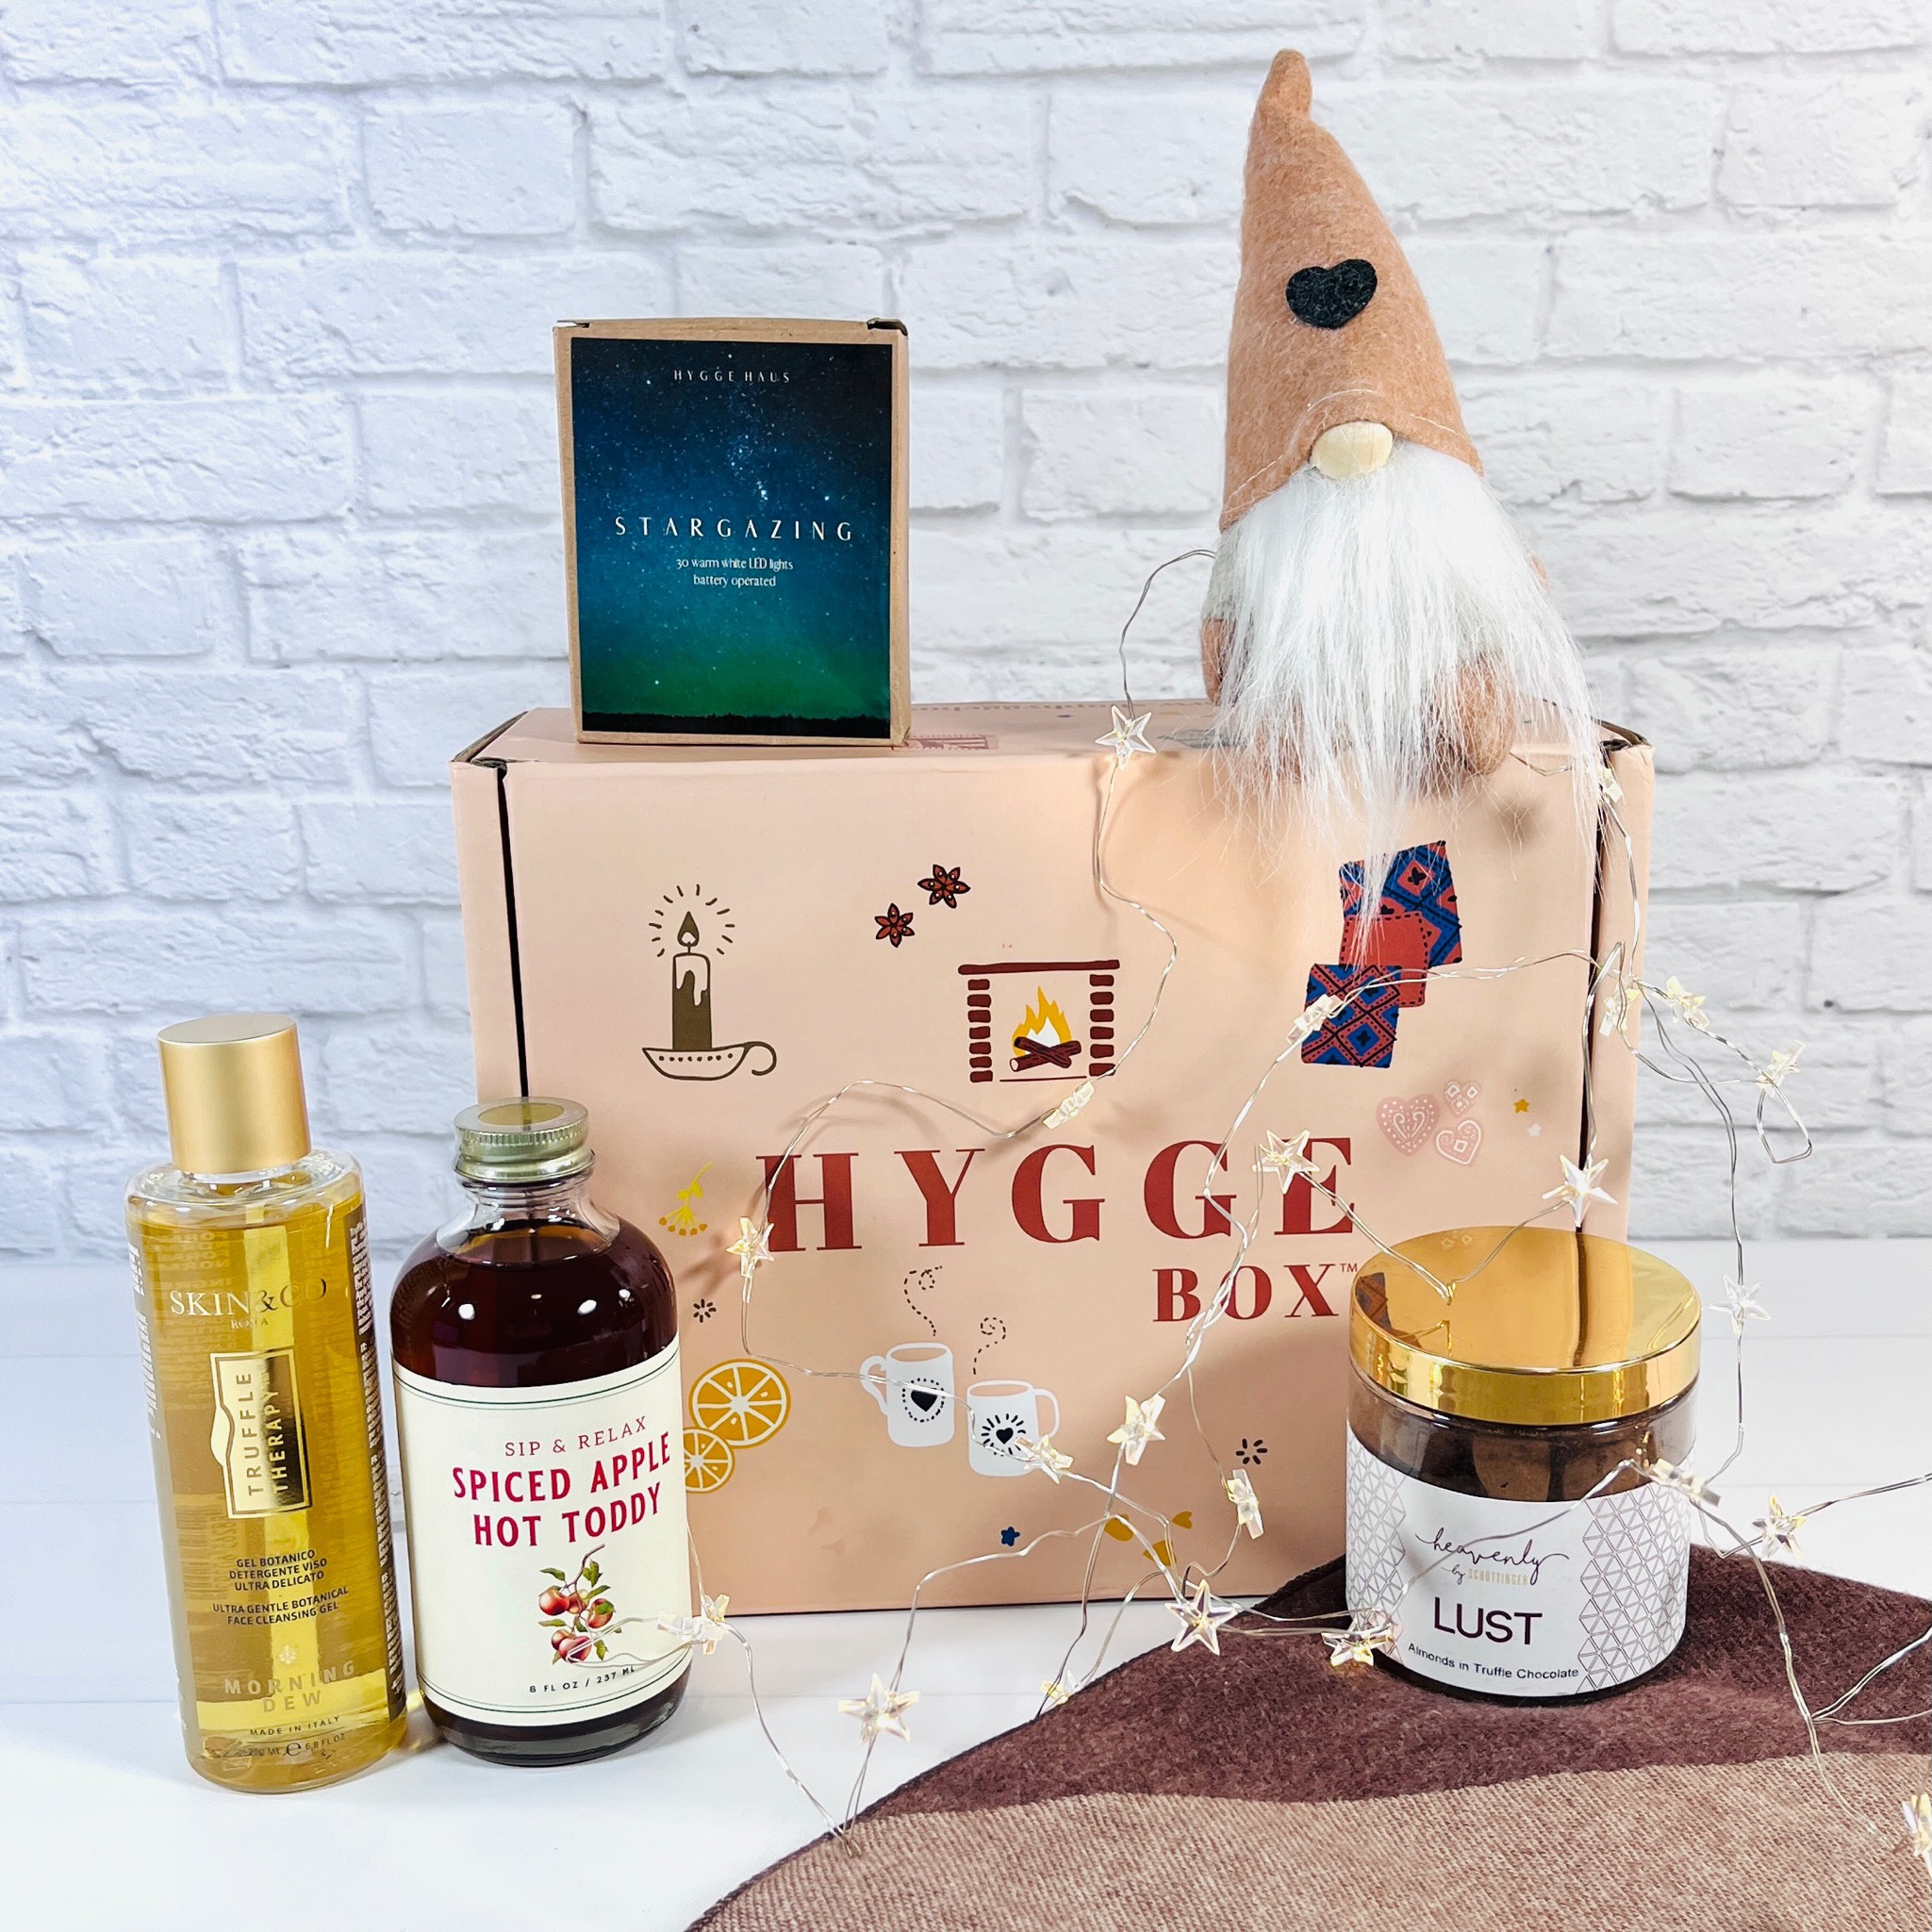 https://hellosubscription.com/wp-content/uploads/2022/11/hygge-box-october-2022-8.jpeg?quality=90&strip=all